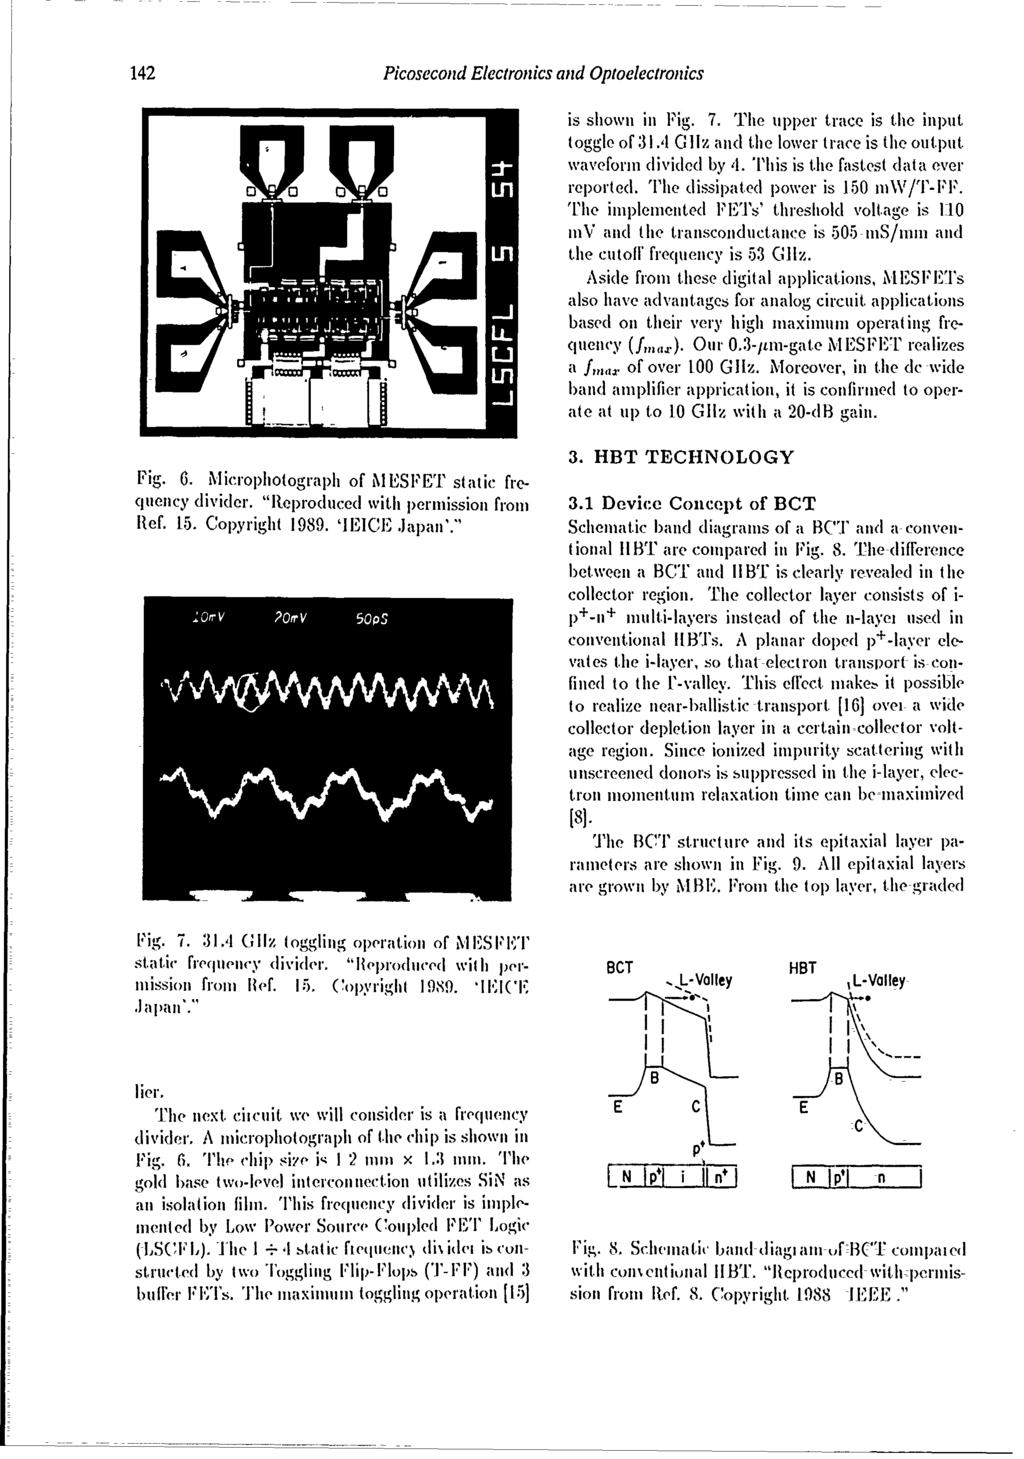 142 Picosecond Electronics and Optoelecironics o o~ oreported. Fig. 6. imicrophotograph of ii ESPET static frequency divider. "Reproduced with permission from Ref. 15. Copyright 1989. 'IEICE, Japan'.